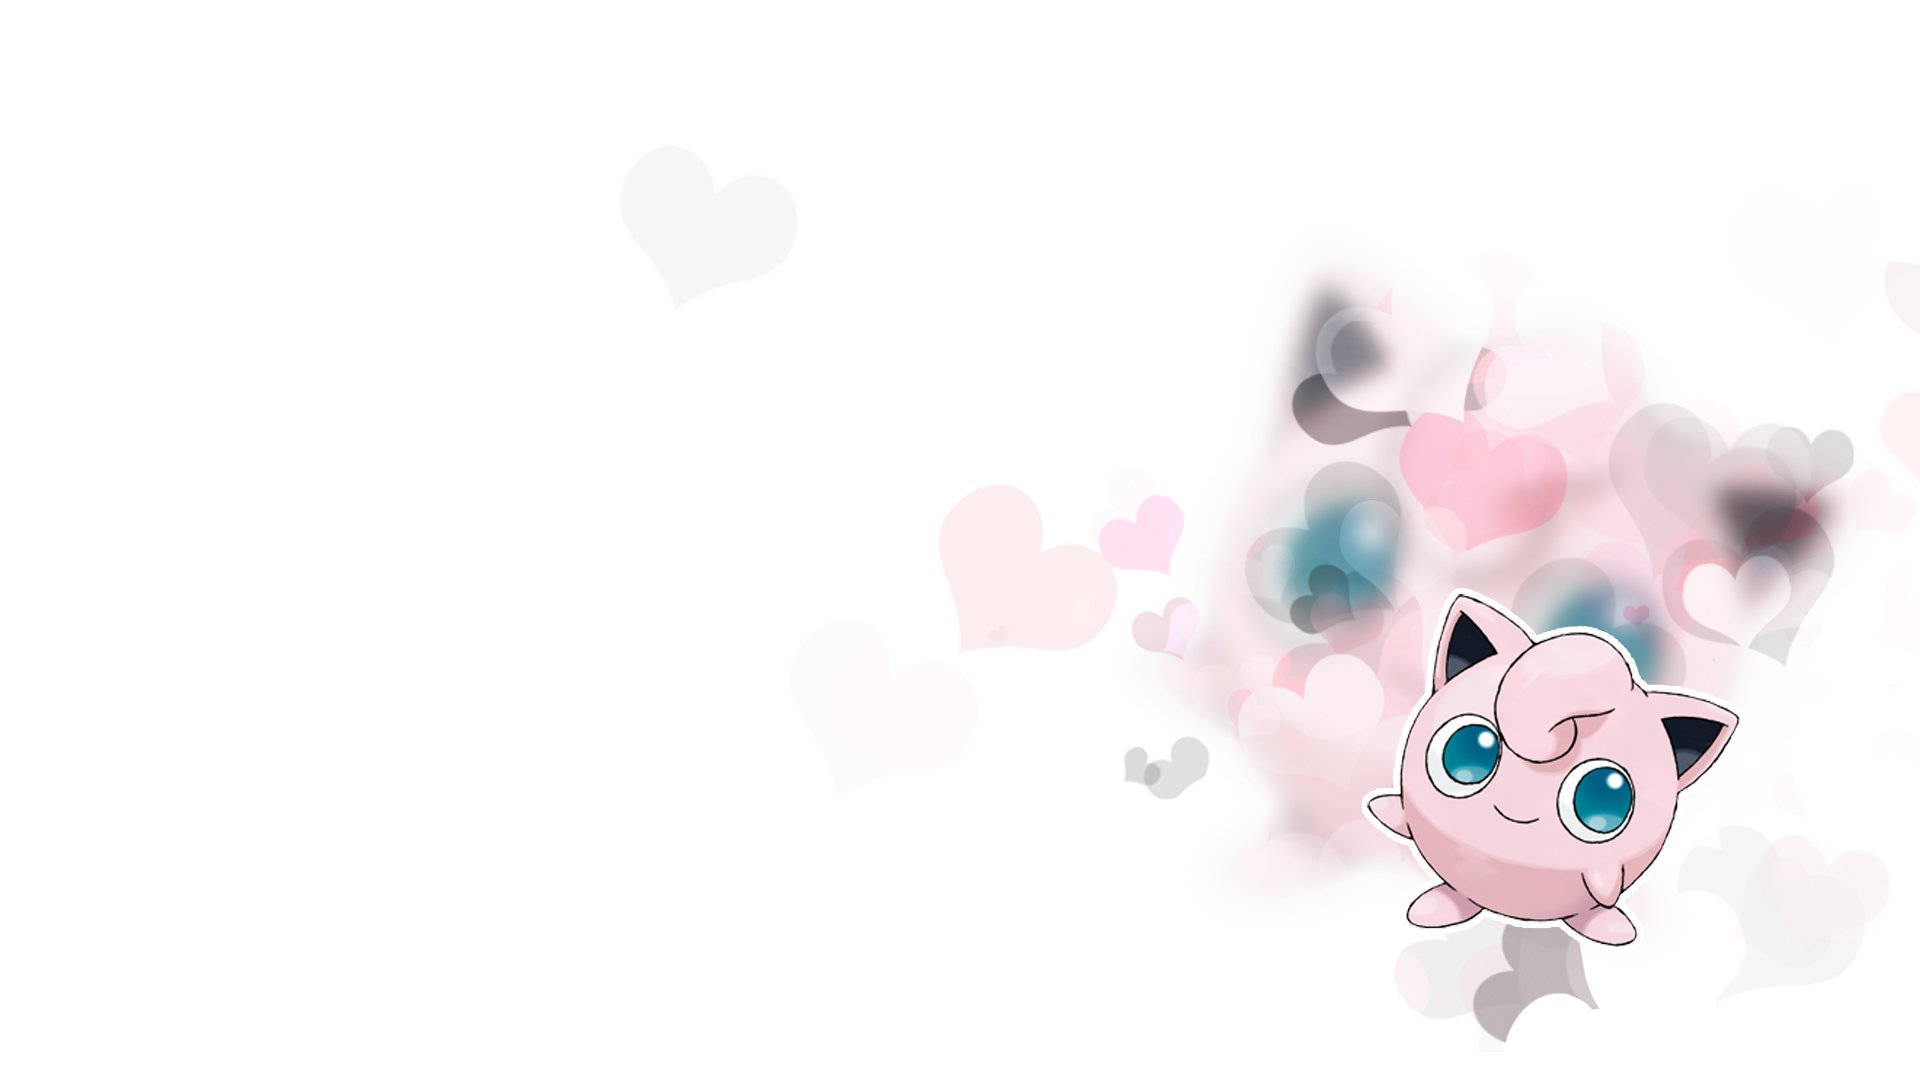 The Loveable Jigglypuff Wallpaper